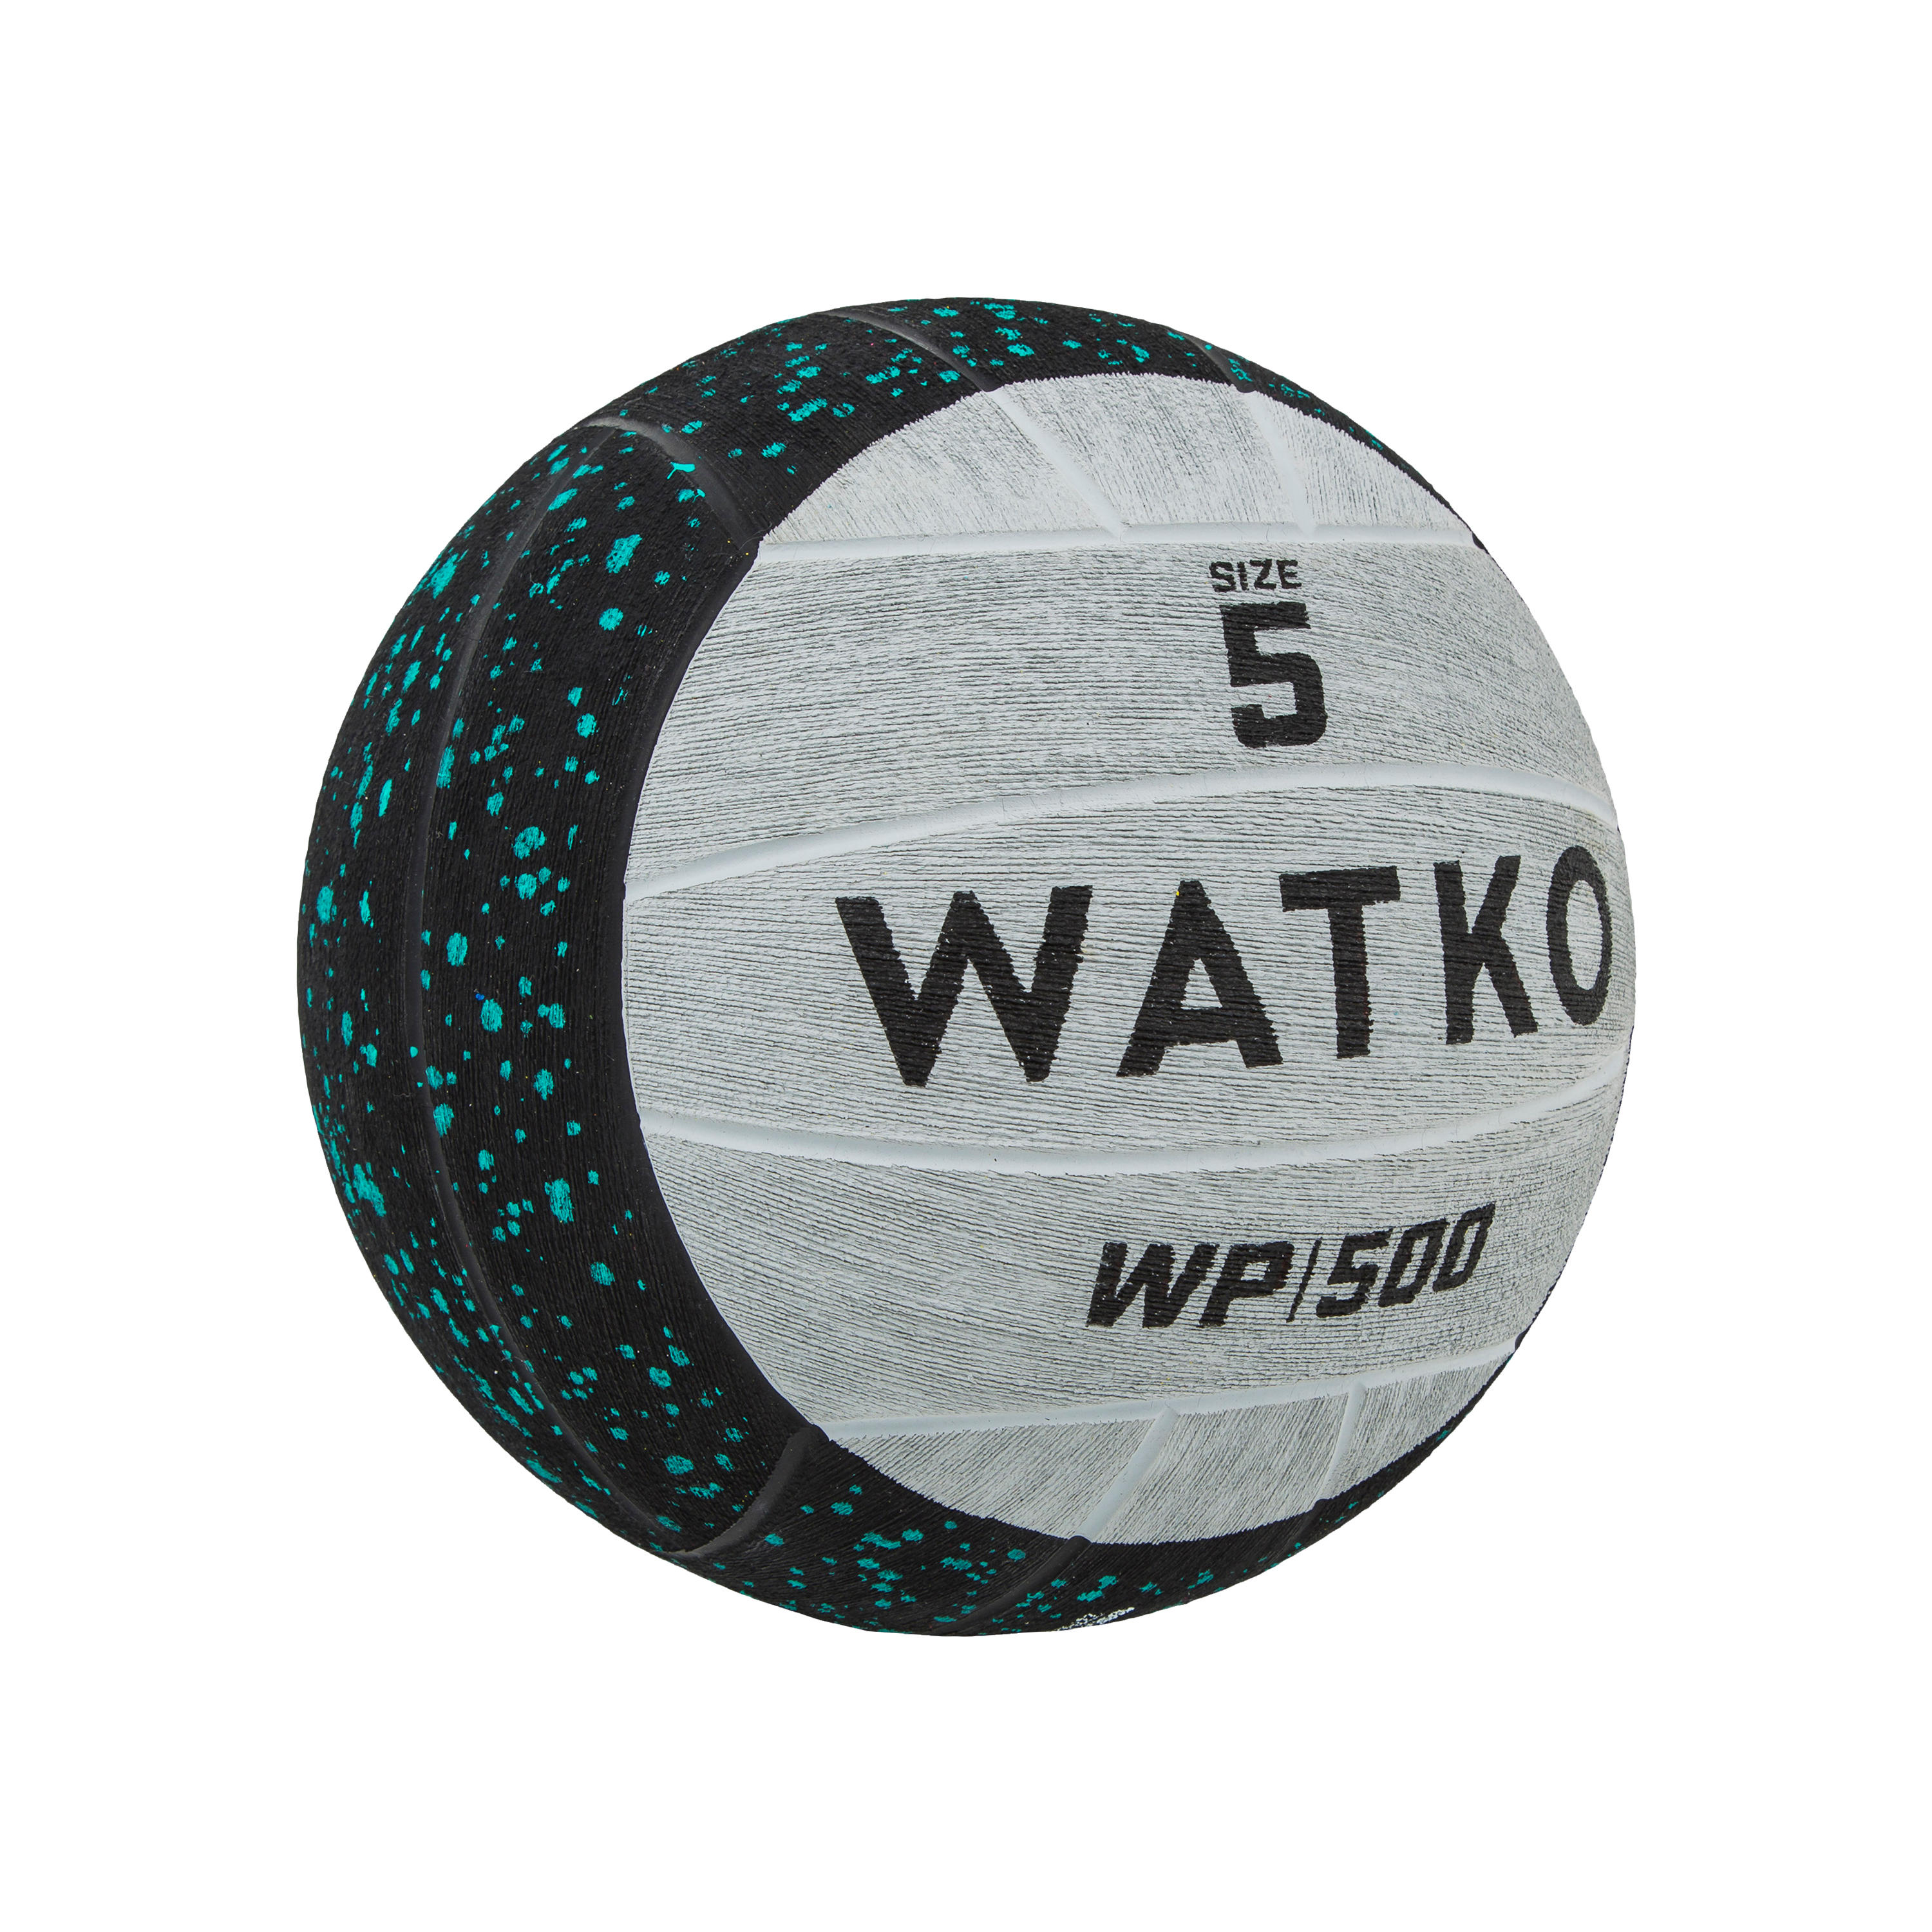 WEIGHTED WATER POLO BALL WP500 1KG SIZE 5 2/6